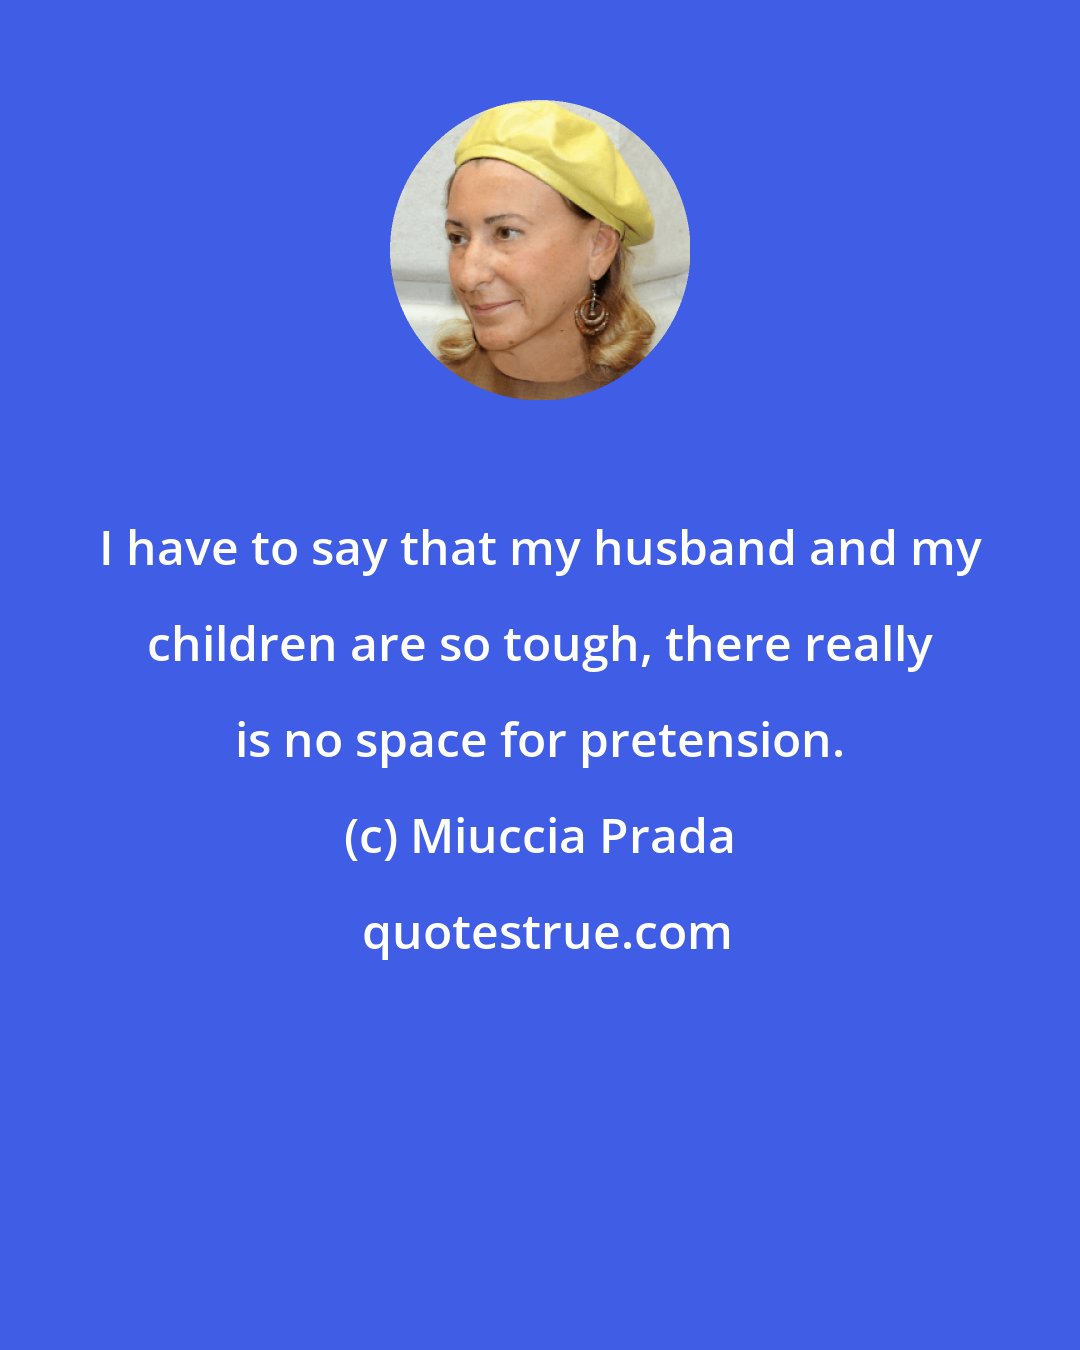 Miuccia Prada: I have to say that my husband and my children are so tough, there really is no space for pretension.